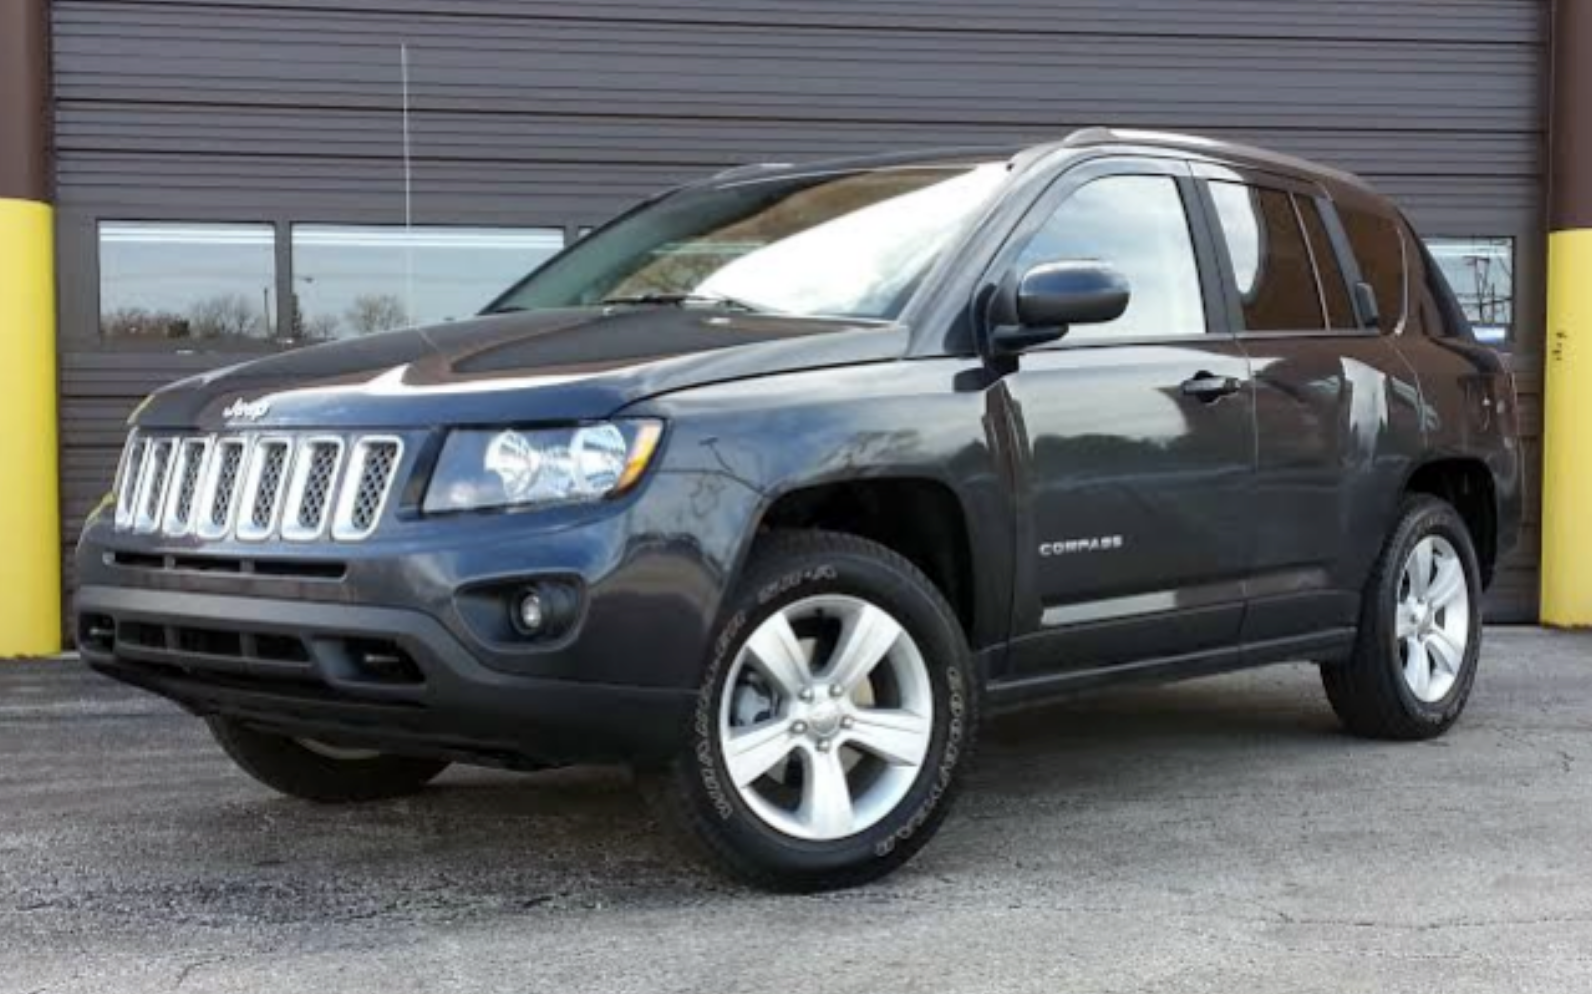 Test Drive 15 Jeep Compass Latitude The Daily Drive Consumer Guide The Daily Drive Consumer Guide